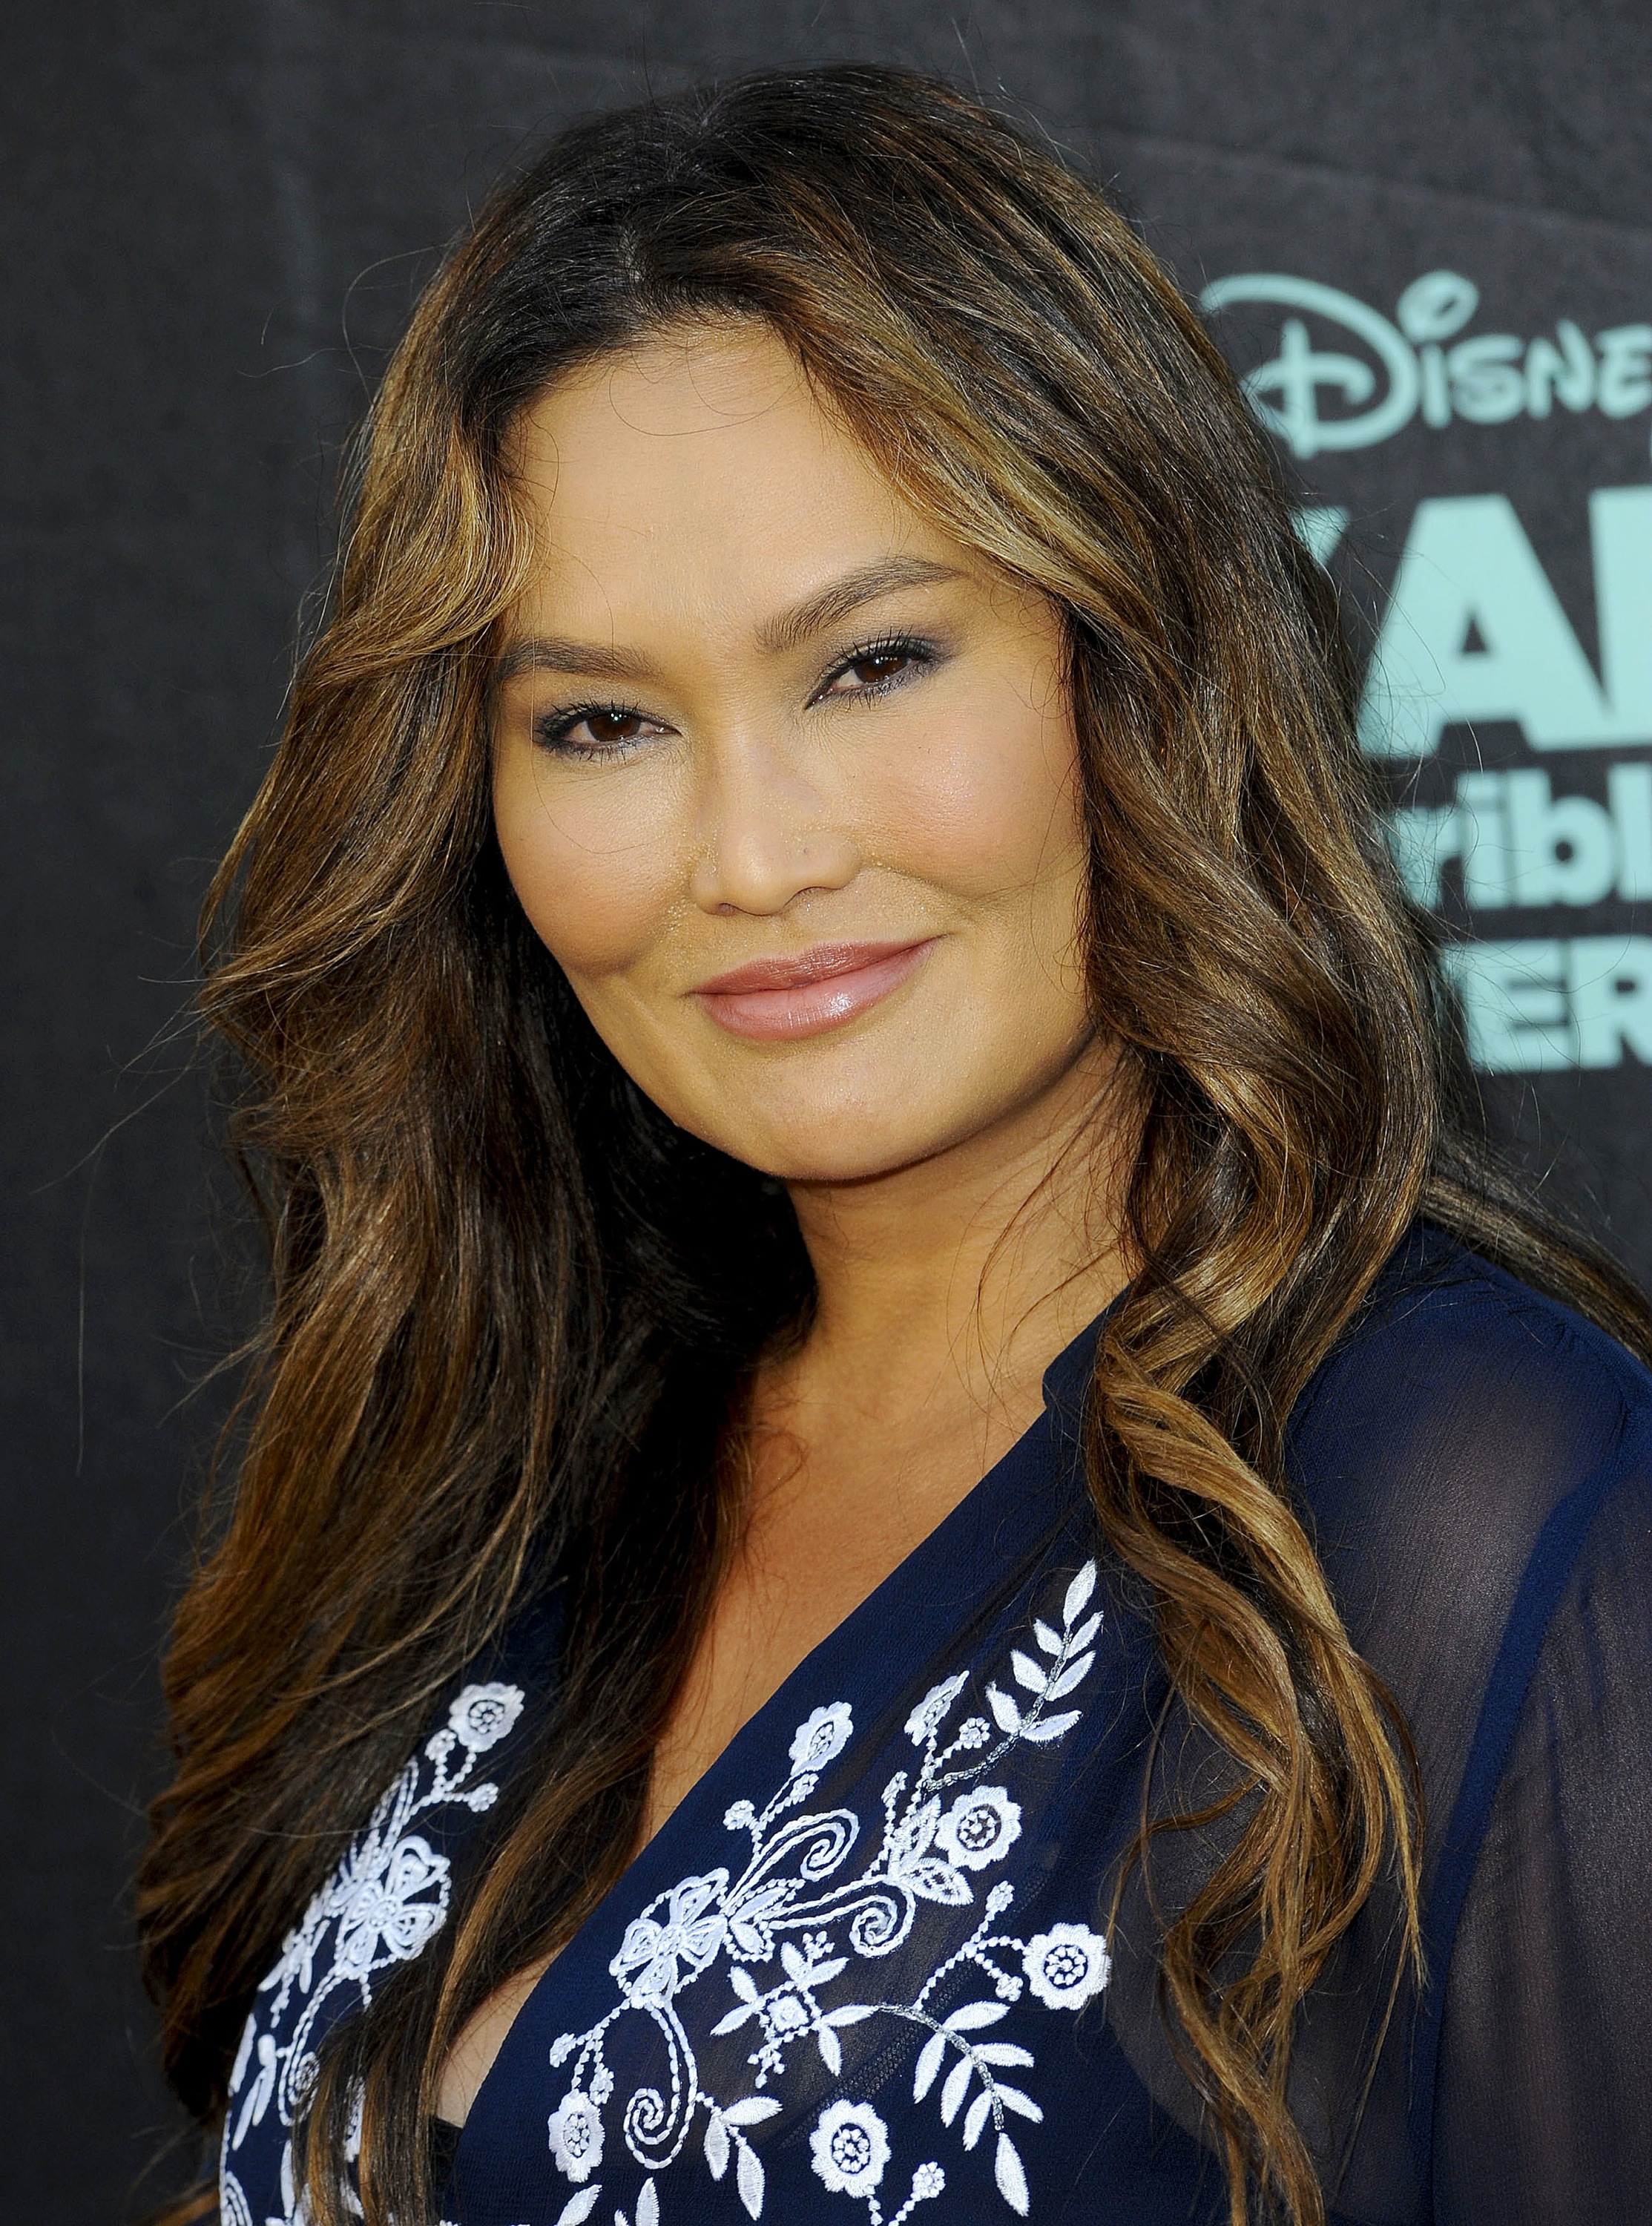 Tia Carrere attends the premiere of Alexander And Terrible, Horrible, No Go...